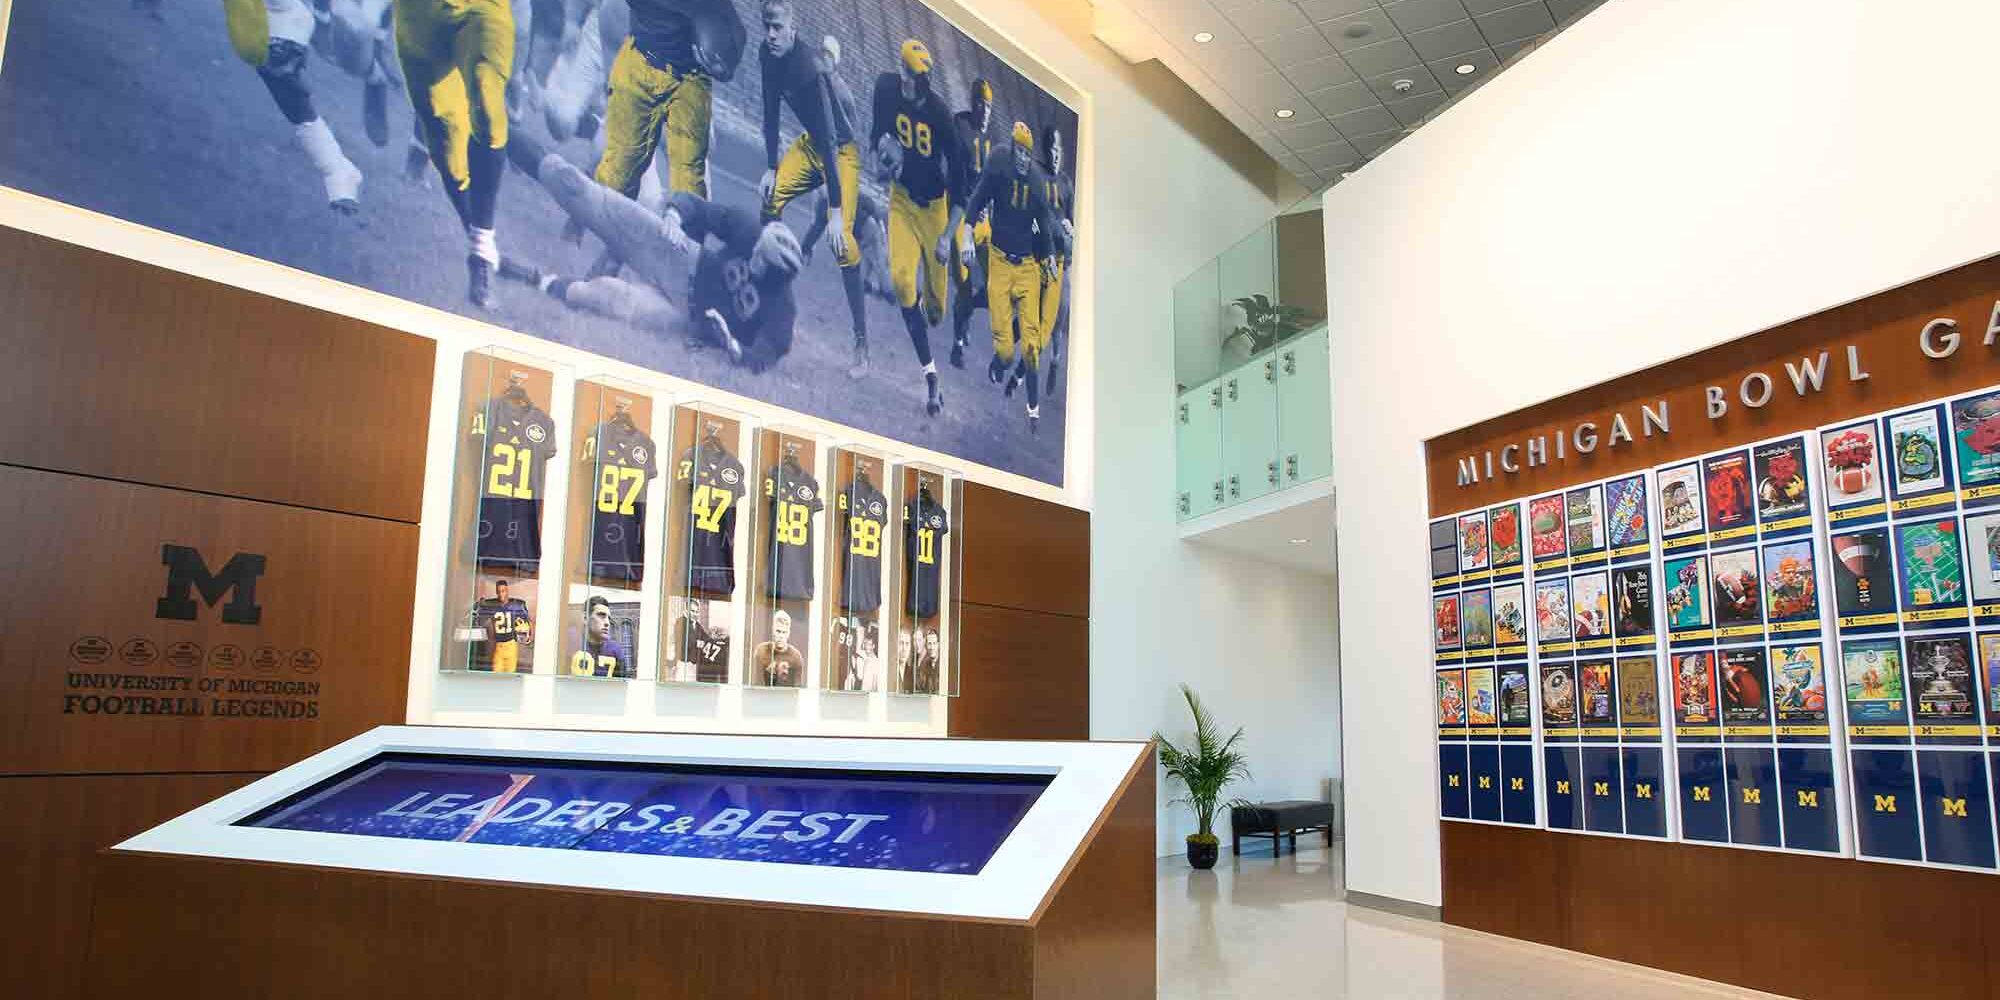 schembechler hall is remodeled for collegiate sports team university of michigan football